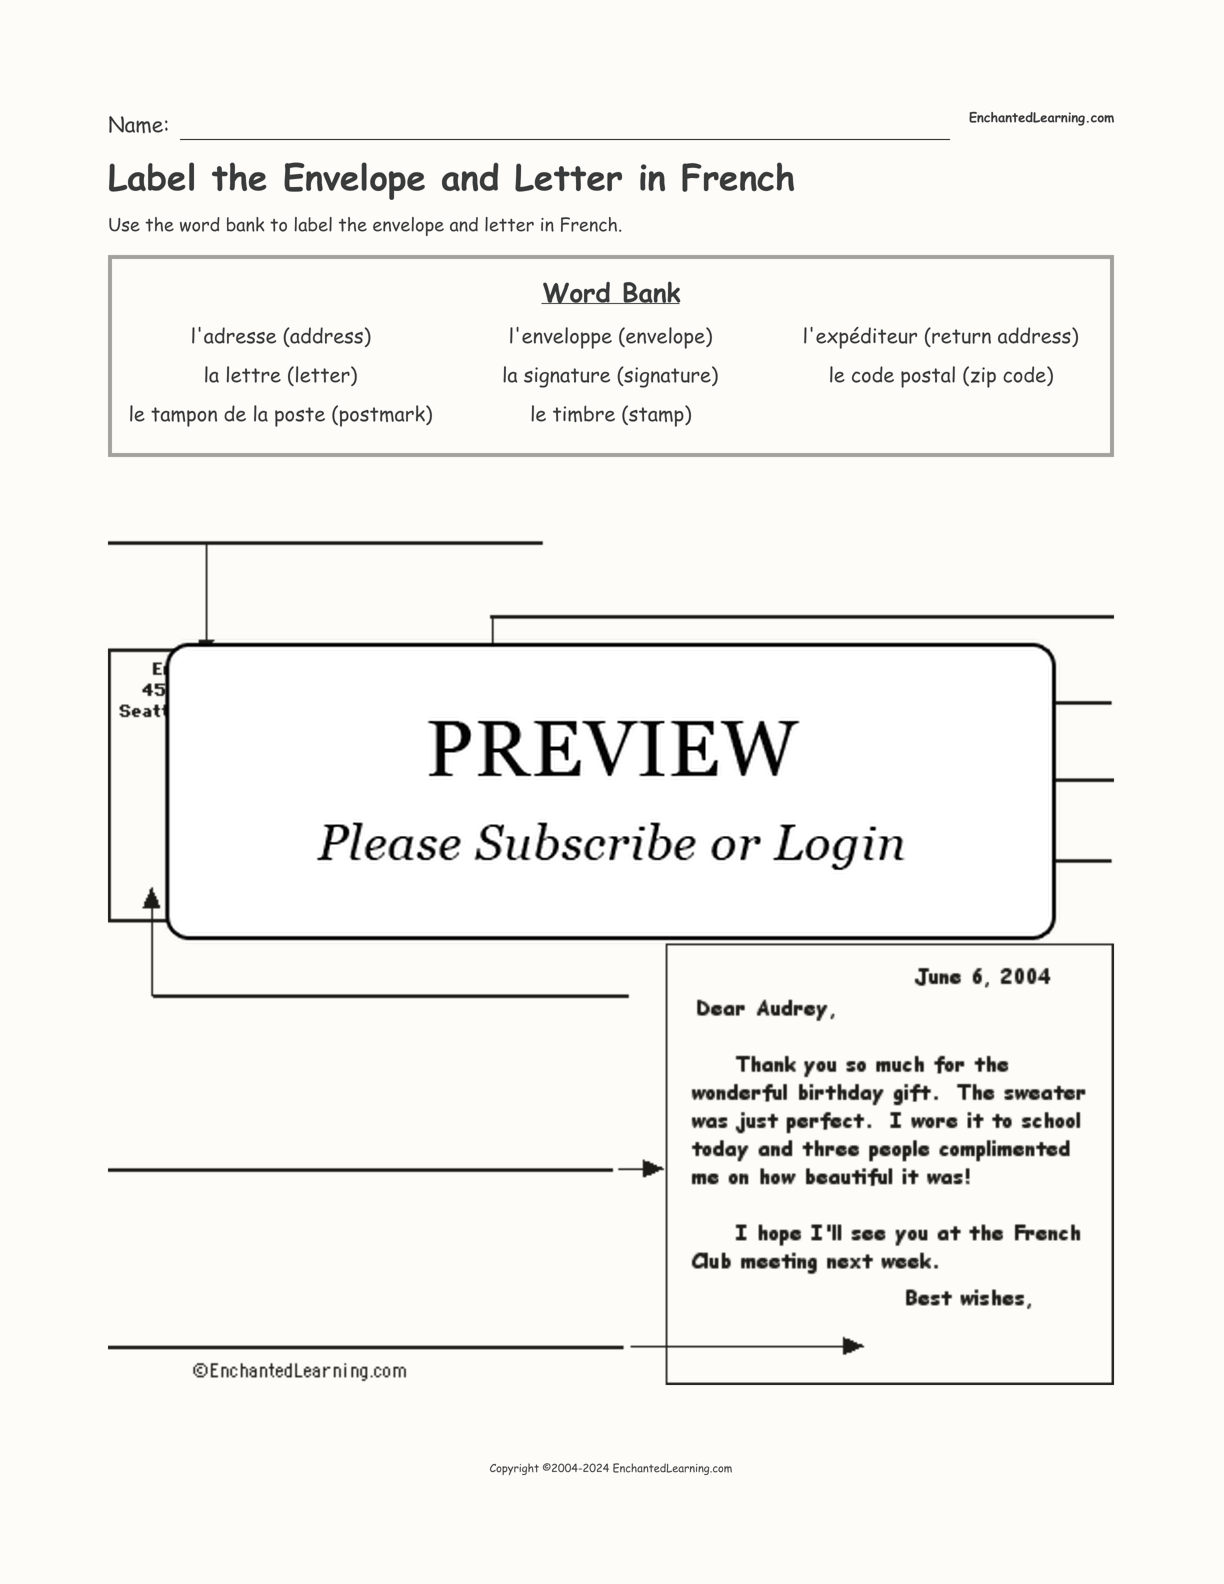 Label the Envelope and Letter in French interactive worksheet page 1